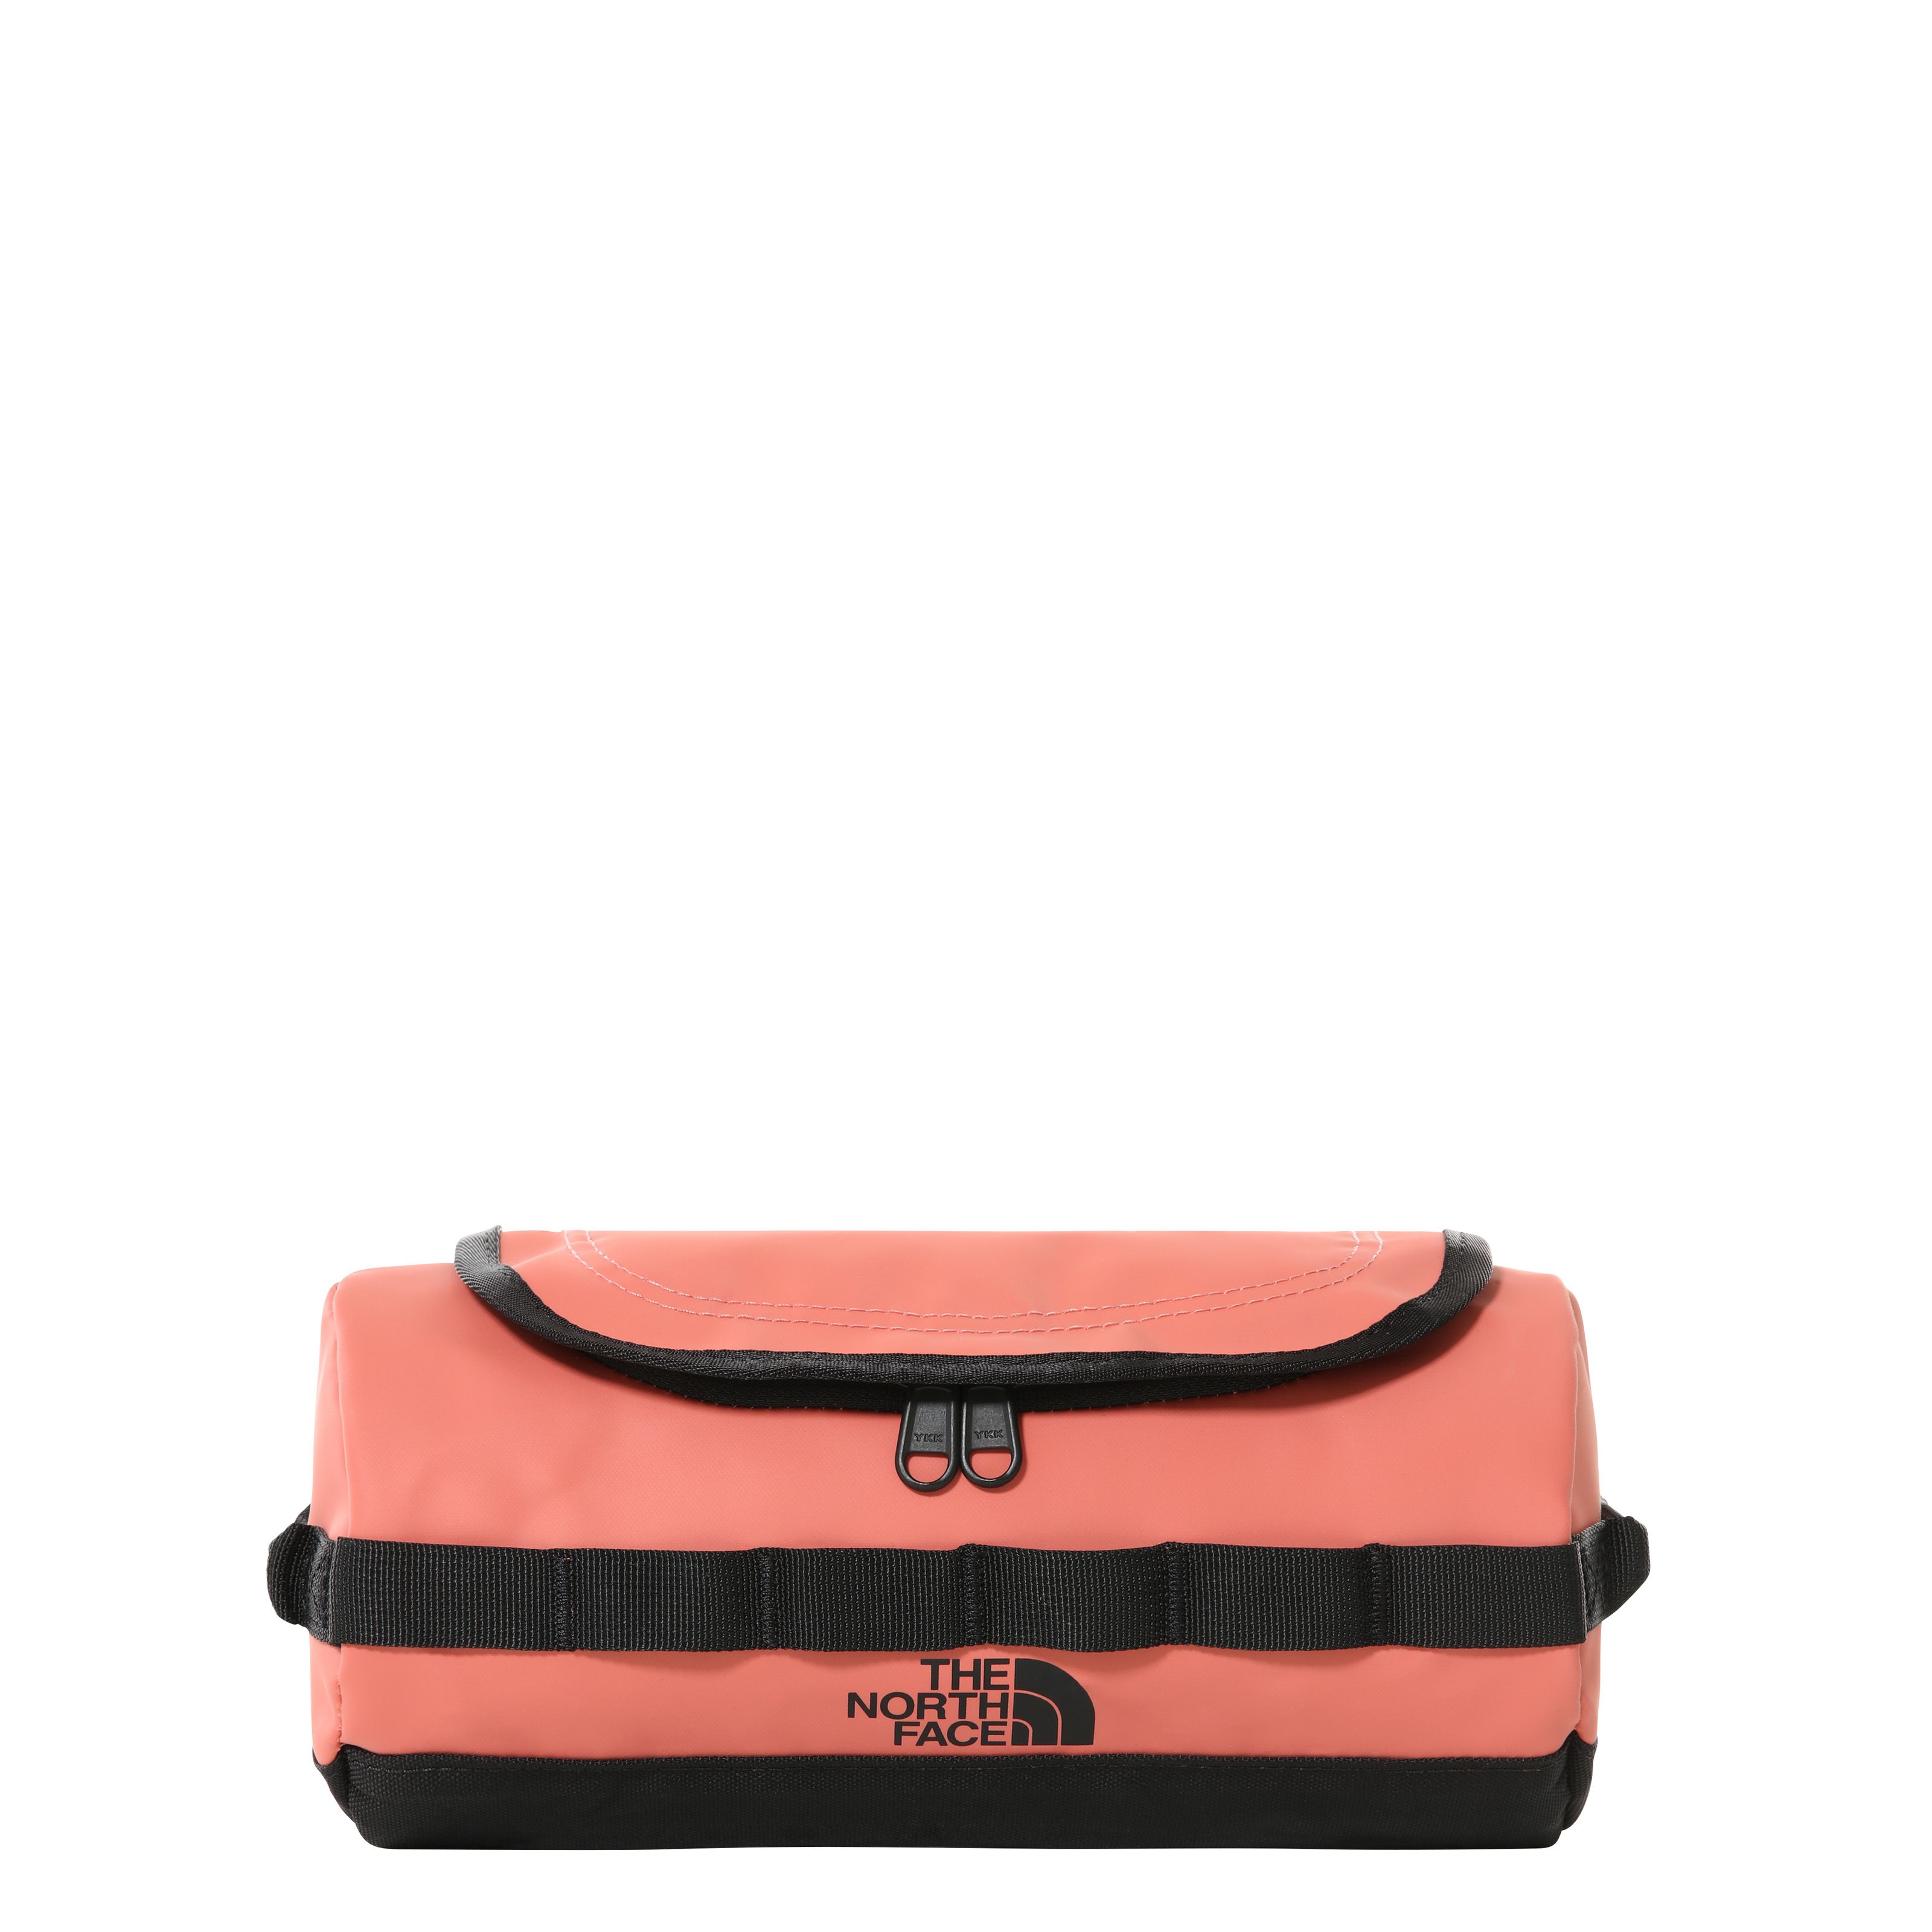 Trousse de toillette Base Camp Travel Canister Small - Faded Rose/Tnf Black